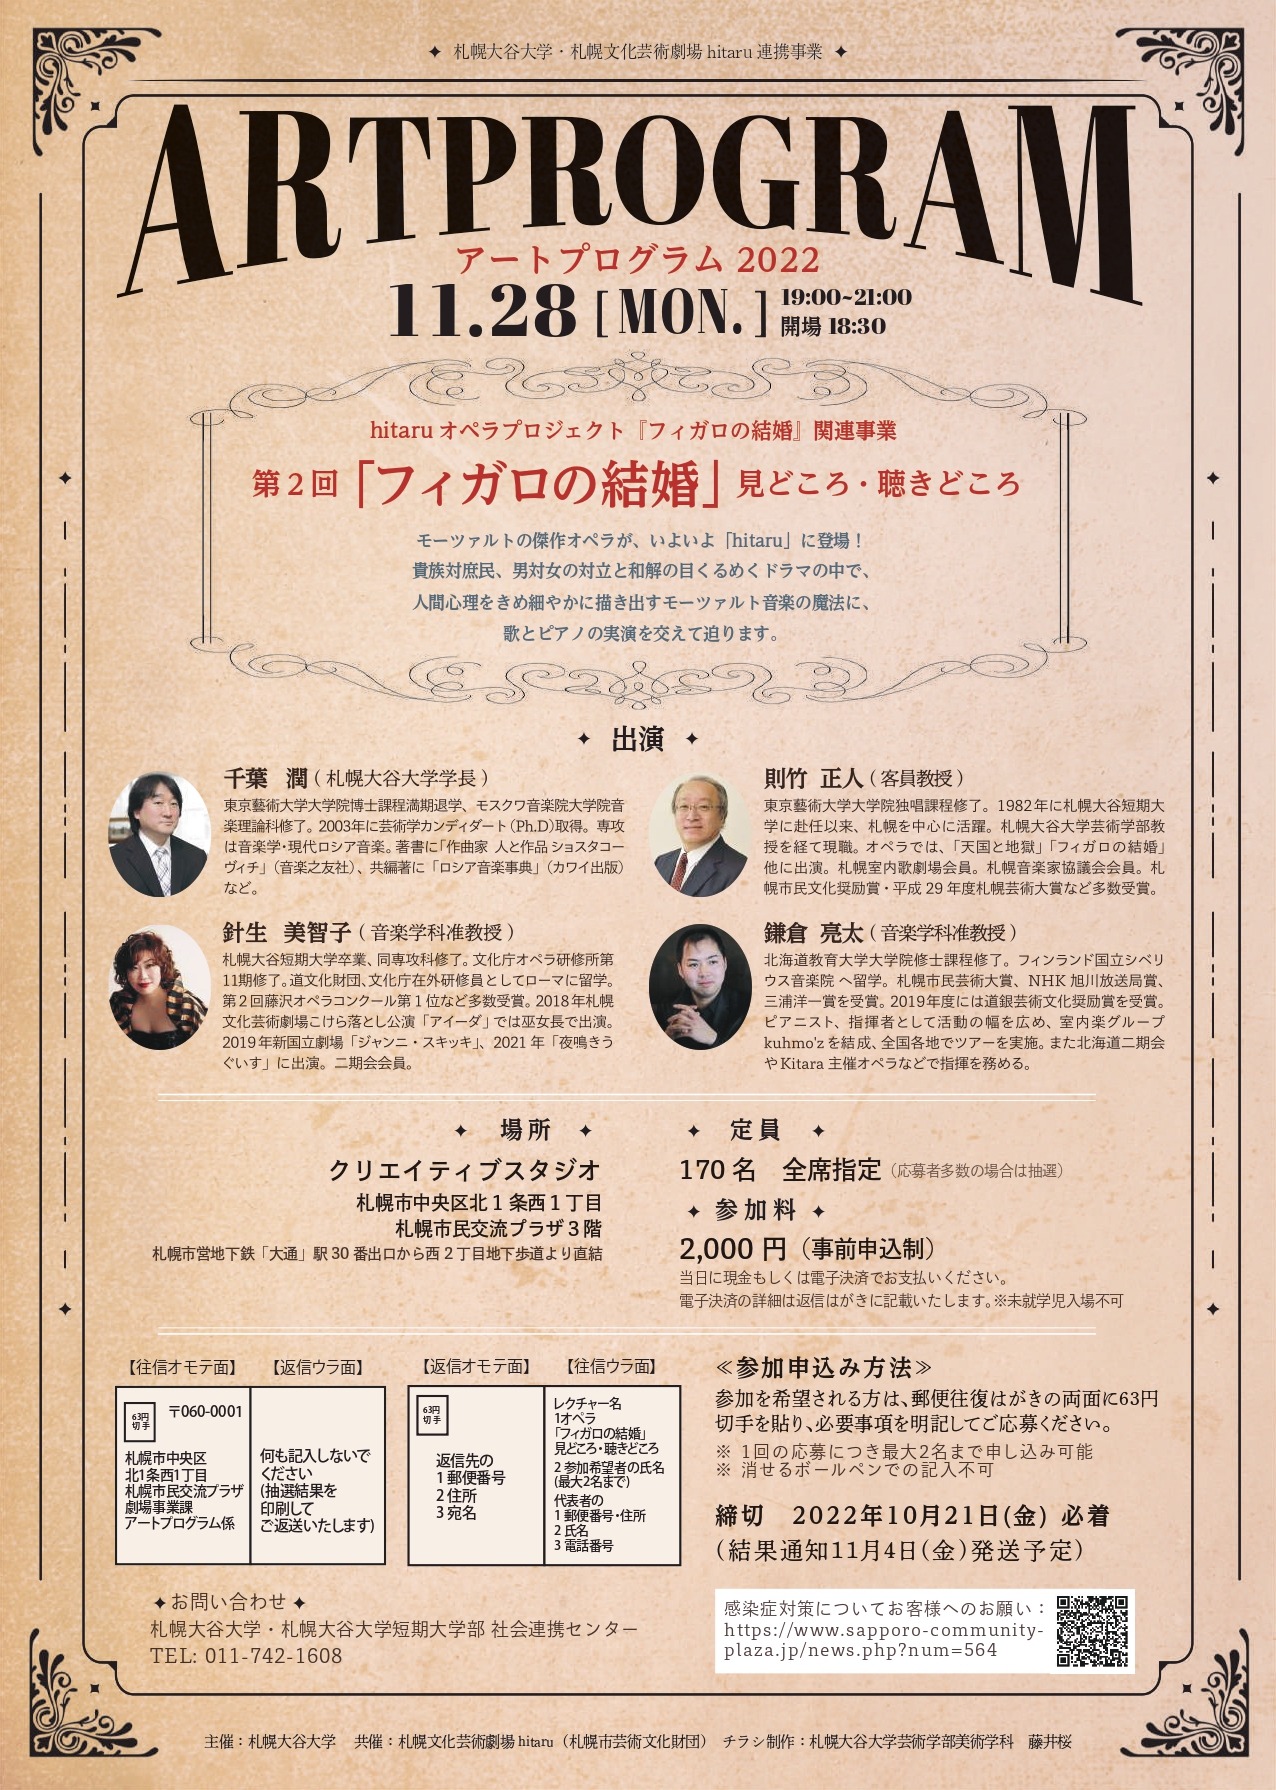 Sapporo Otani University & hitaru Joint Project Art Program 2022 No. 2 Music and Performance Highlights from the Opera “The Marriage of Figaro” image